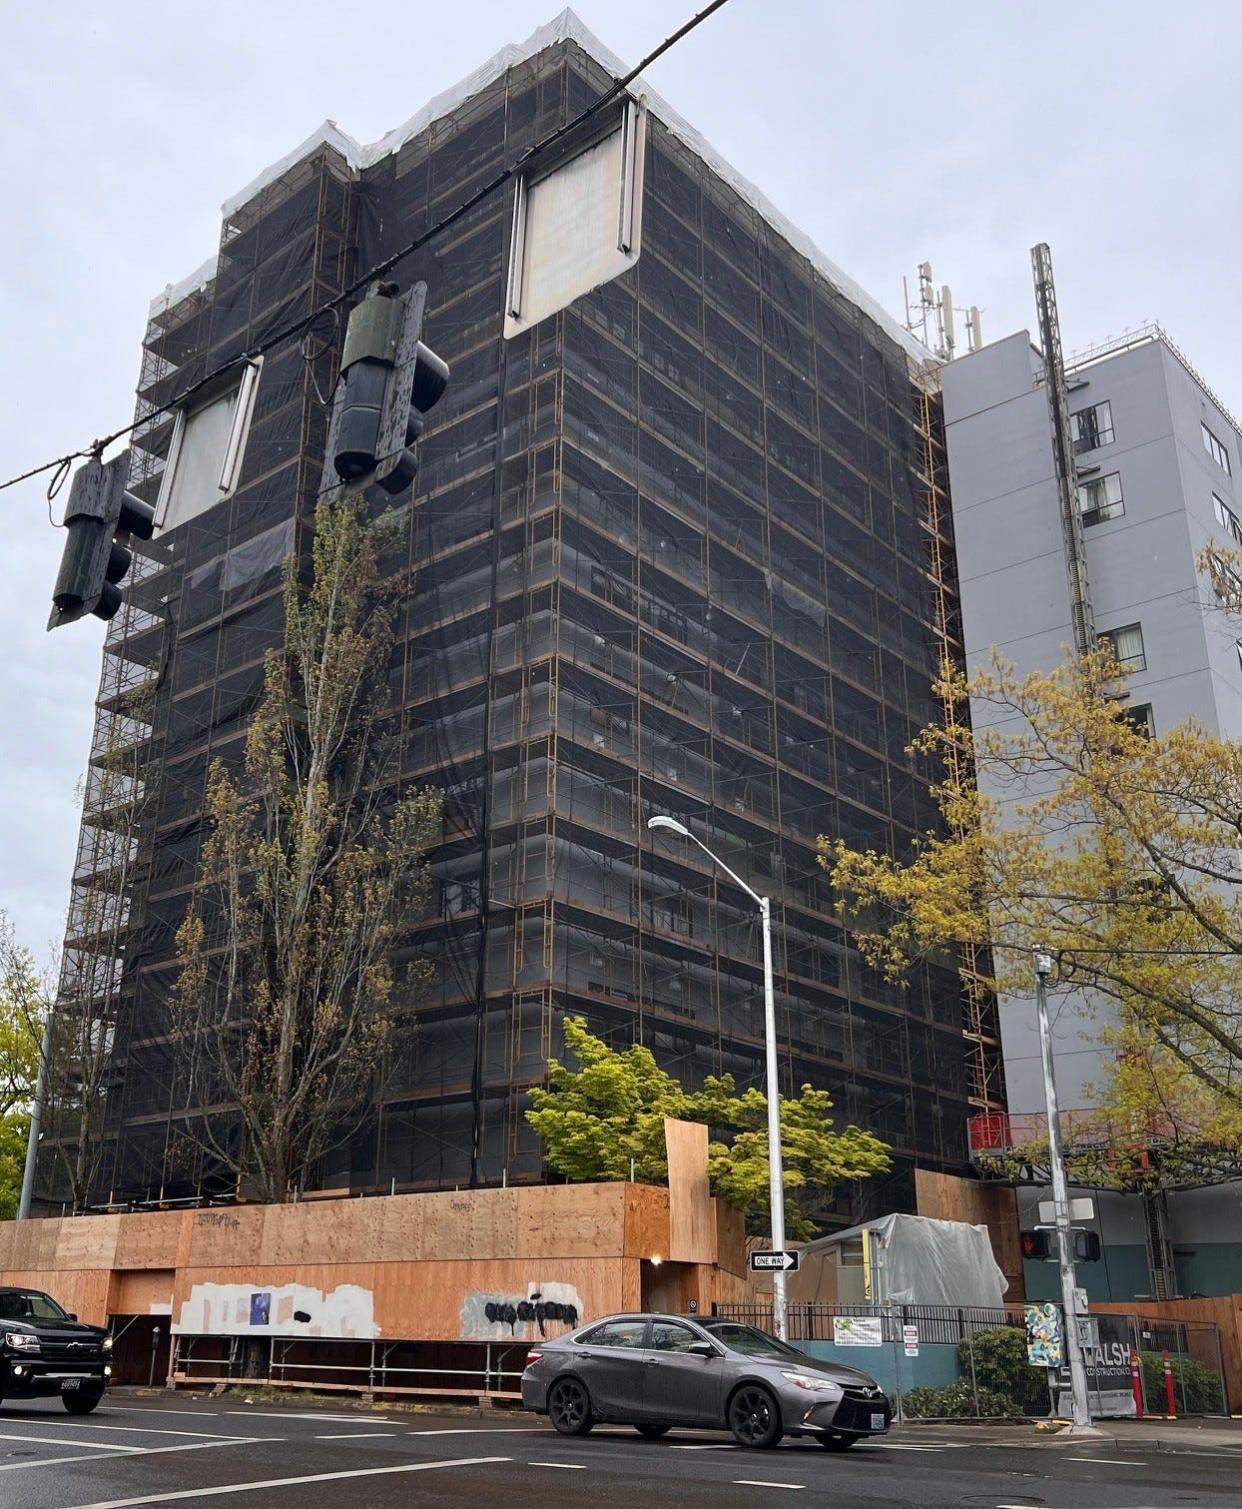 Olive Plaza Apartments is getting interior and exterior upgrades and repairs to renovate the building that is over 40 years old.